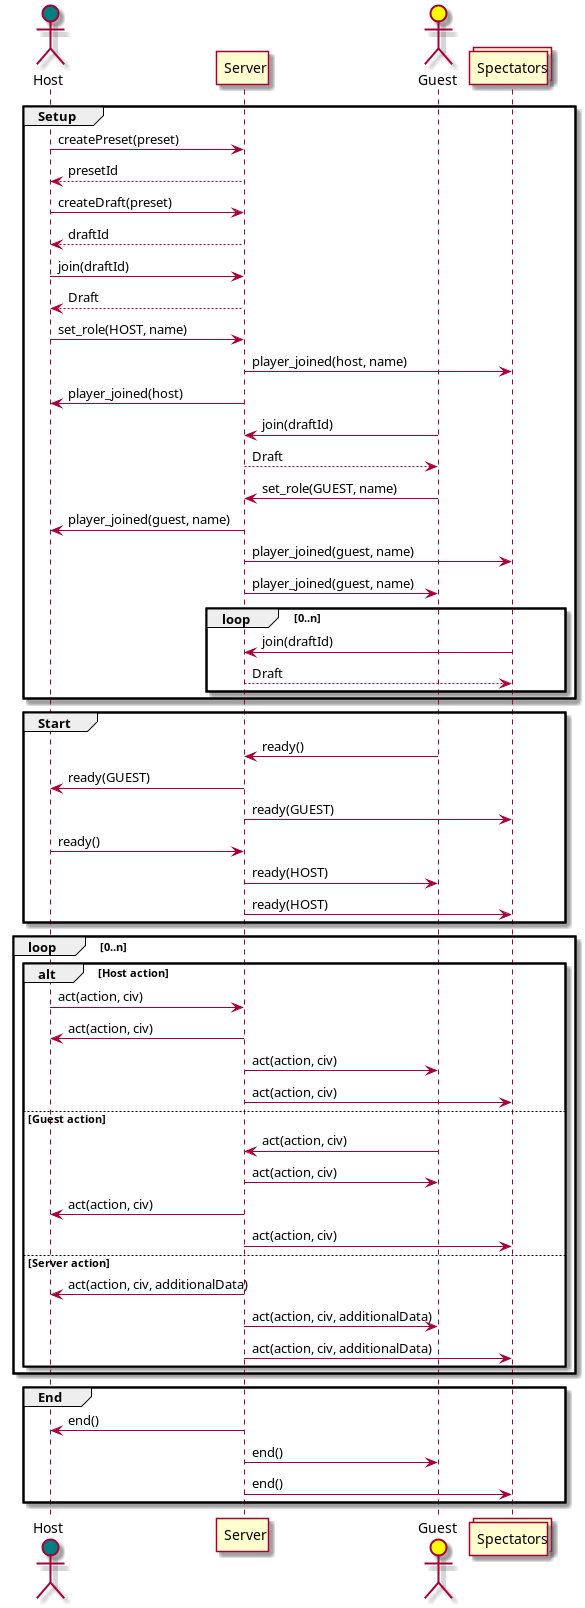 Sequence diagram of a session